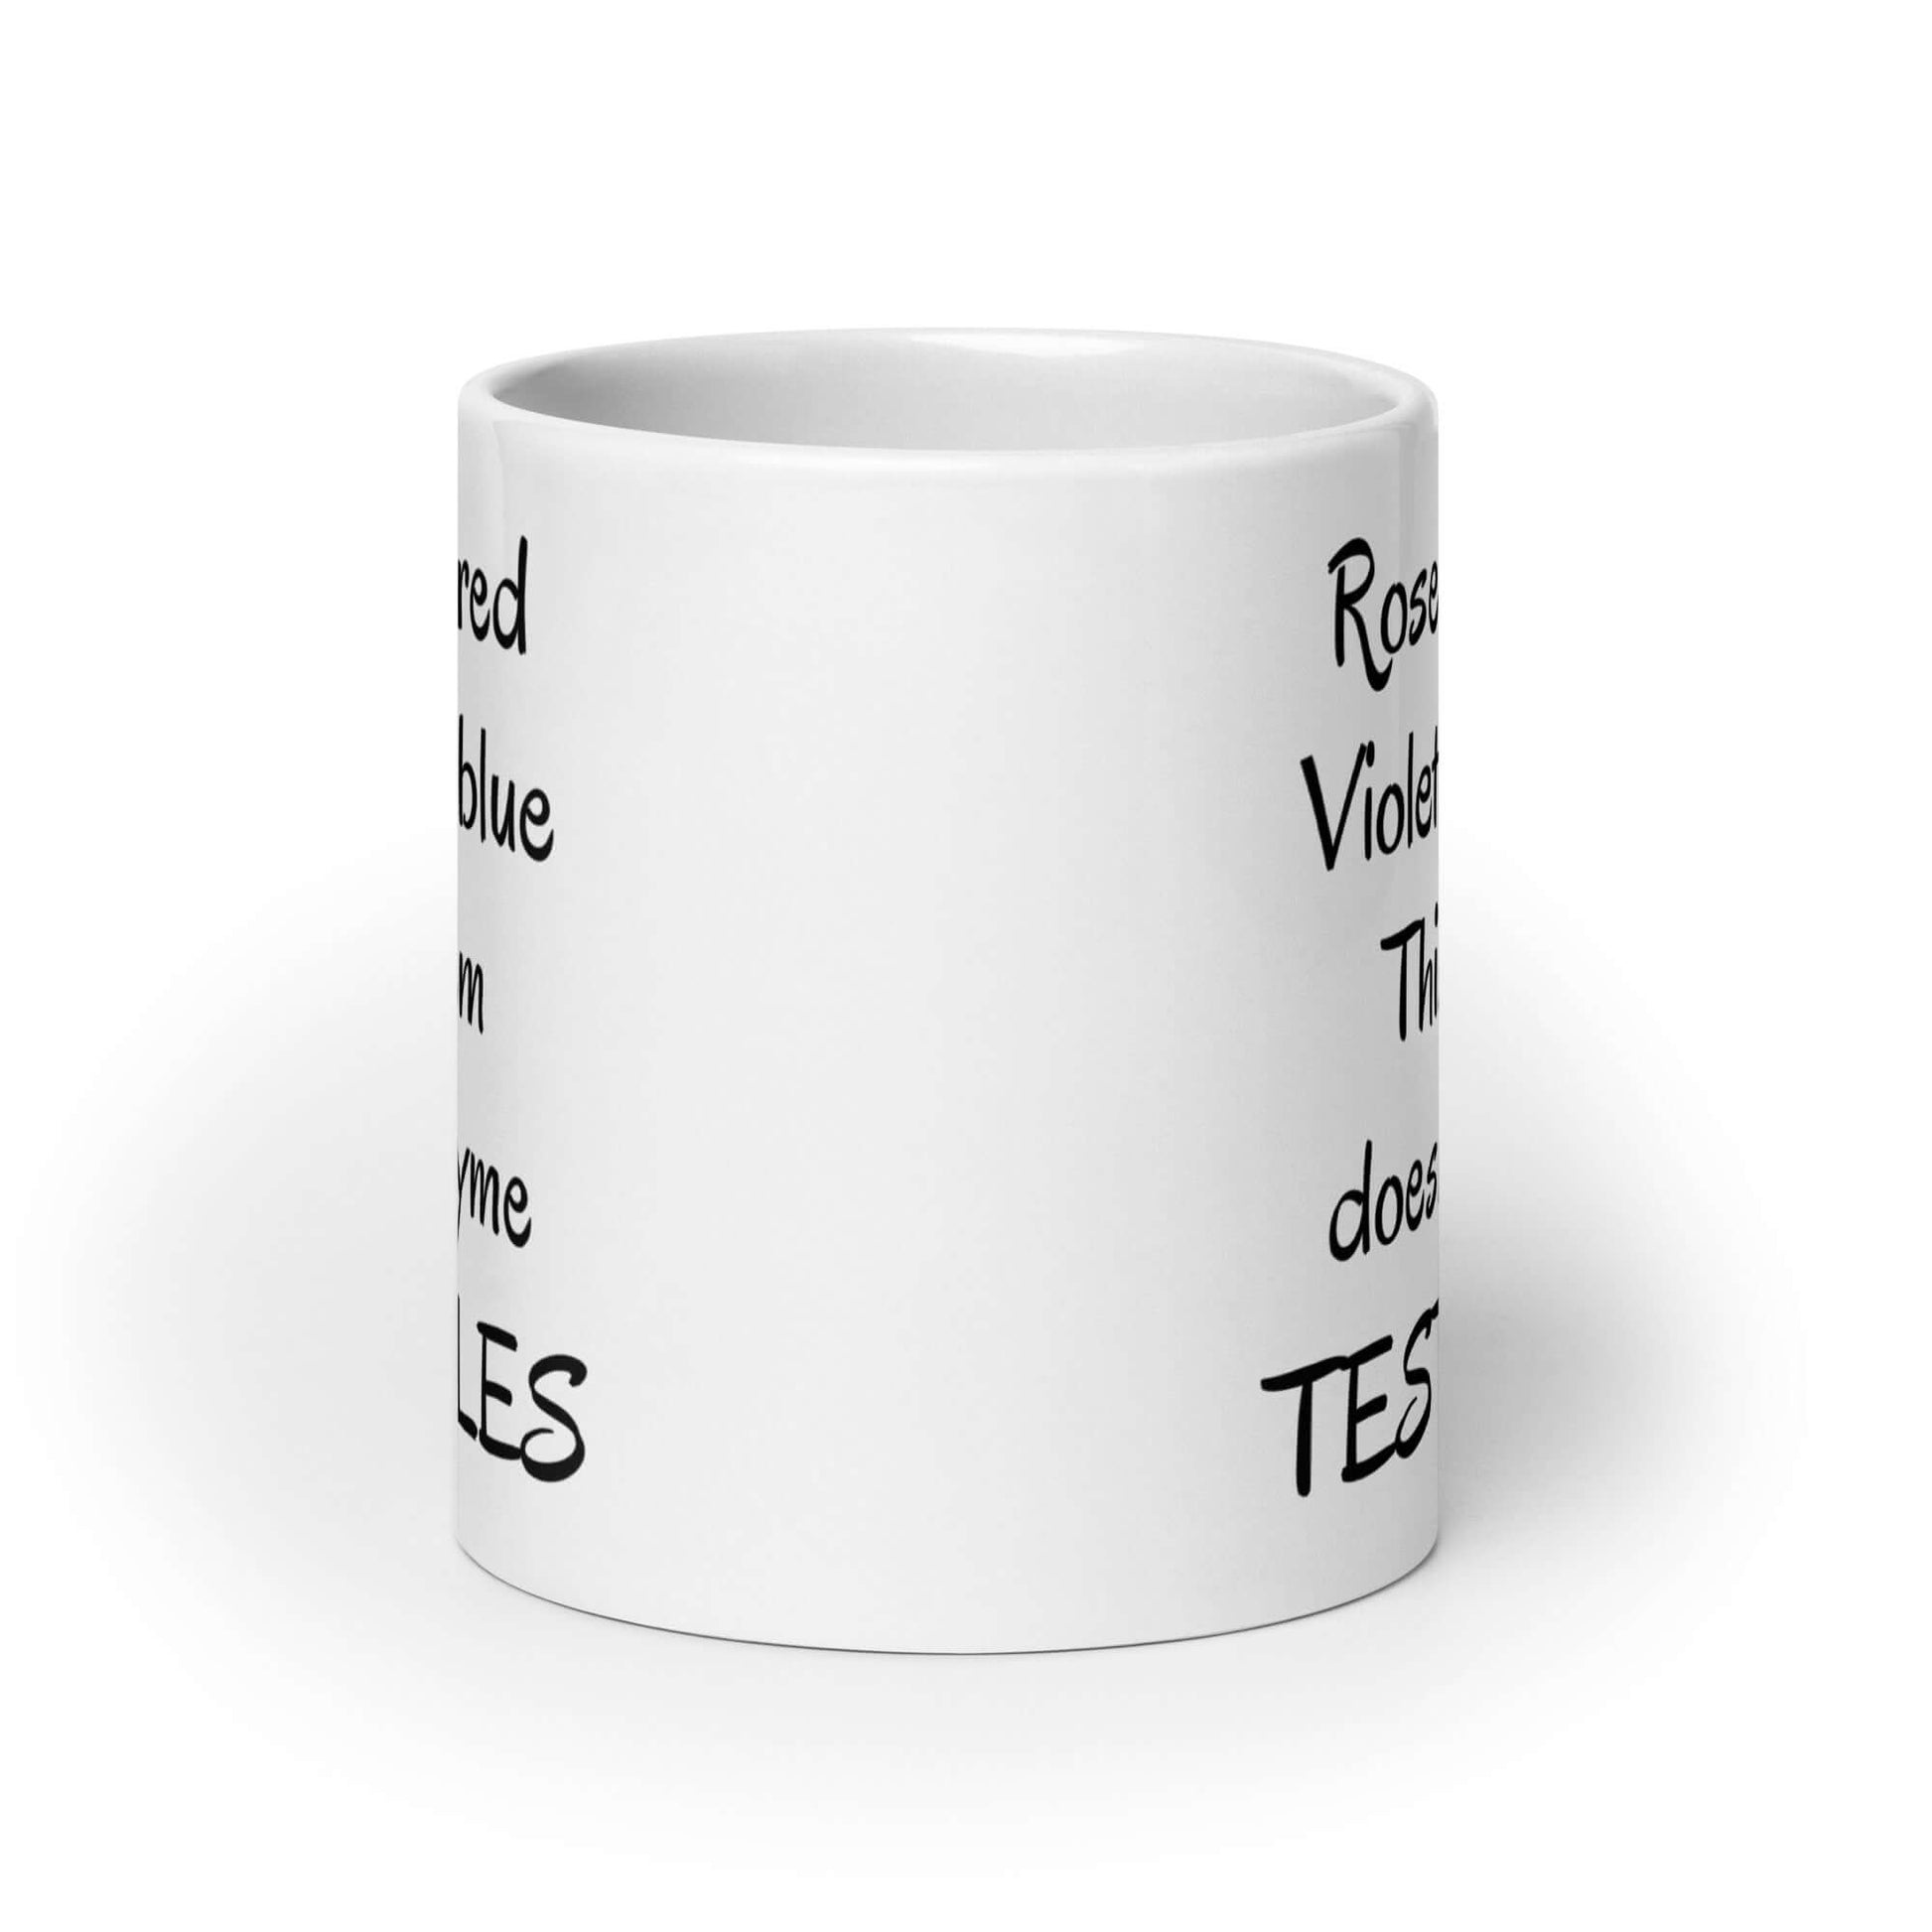 White ceramic coffee mug with funny bad poetry printed on both sides. The poem is Roses are red violets are blue this poem doesn't rhyme testicles.